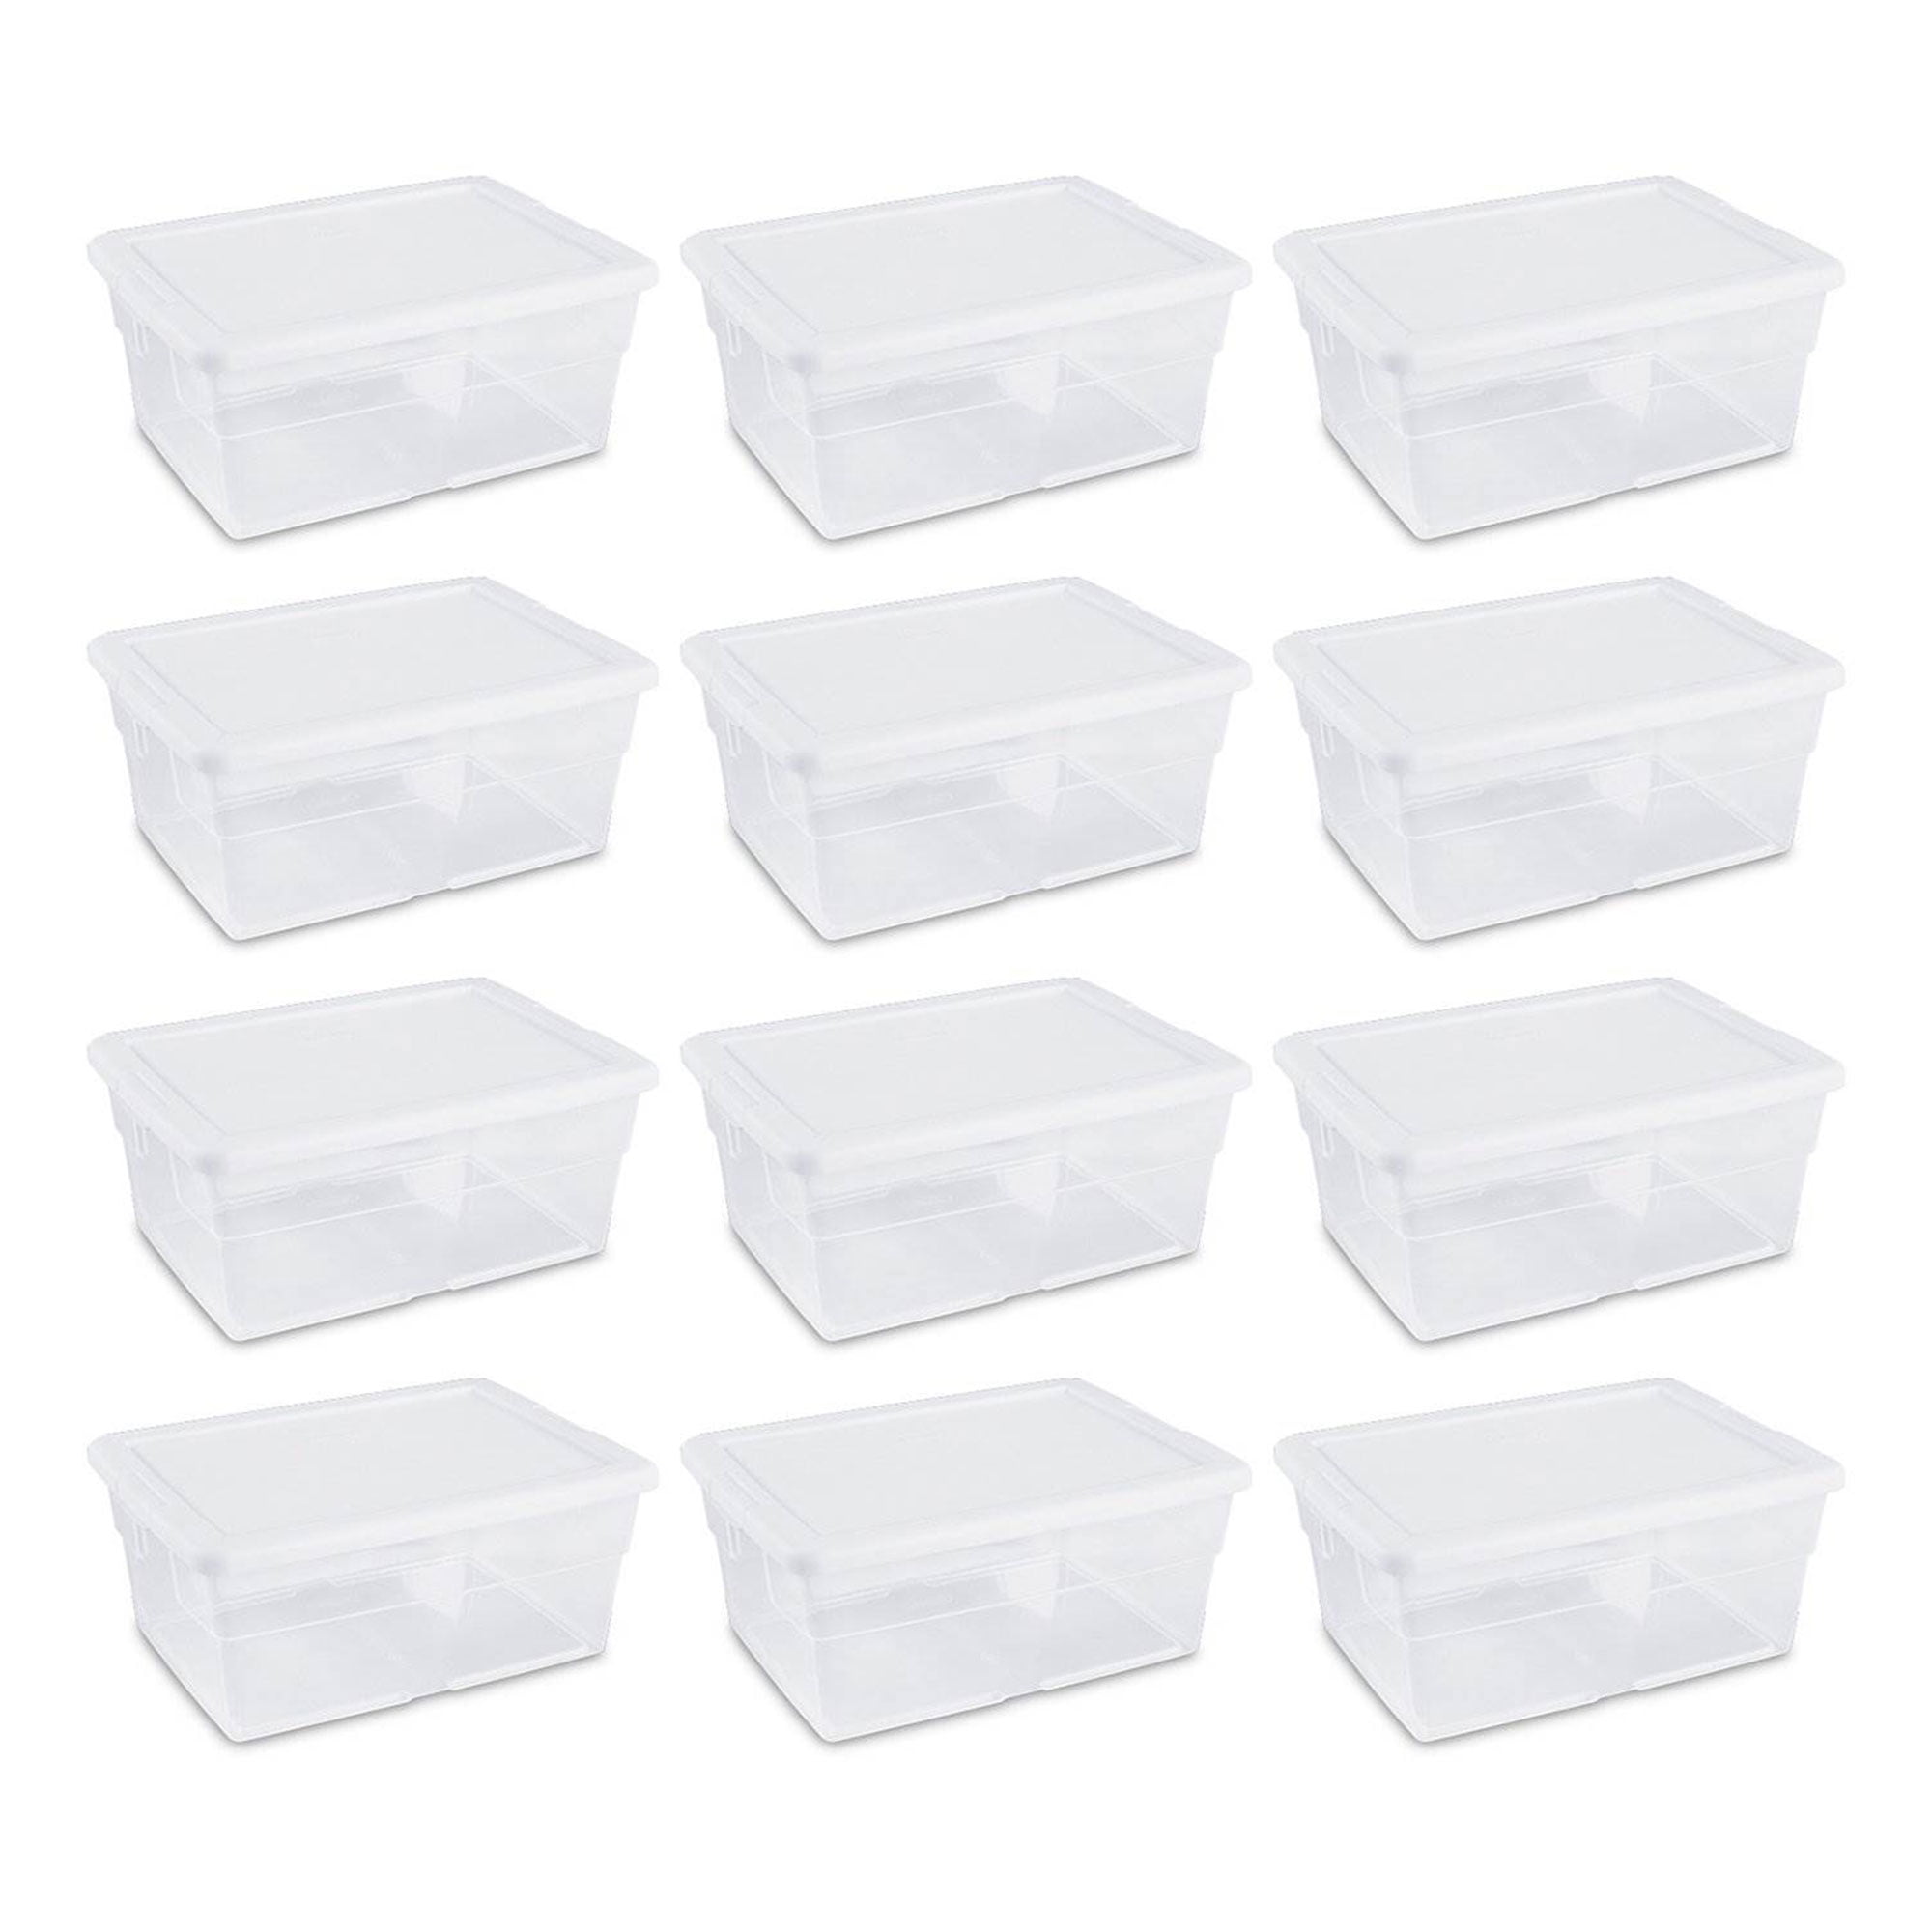 Organizing FREE SHIP 6 Plastic Containers with Snap-on Lids for Crafts Games 